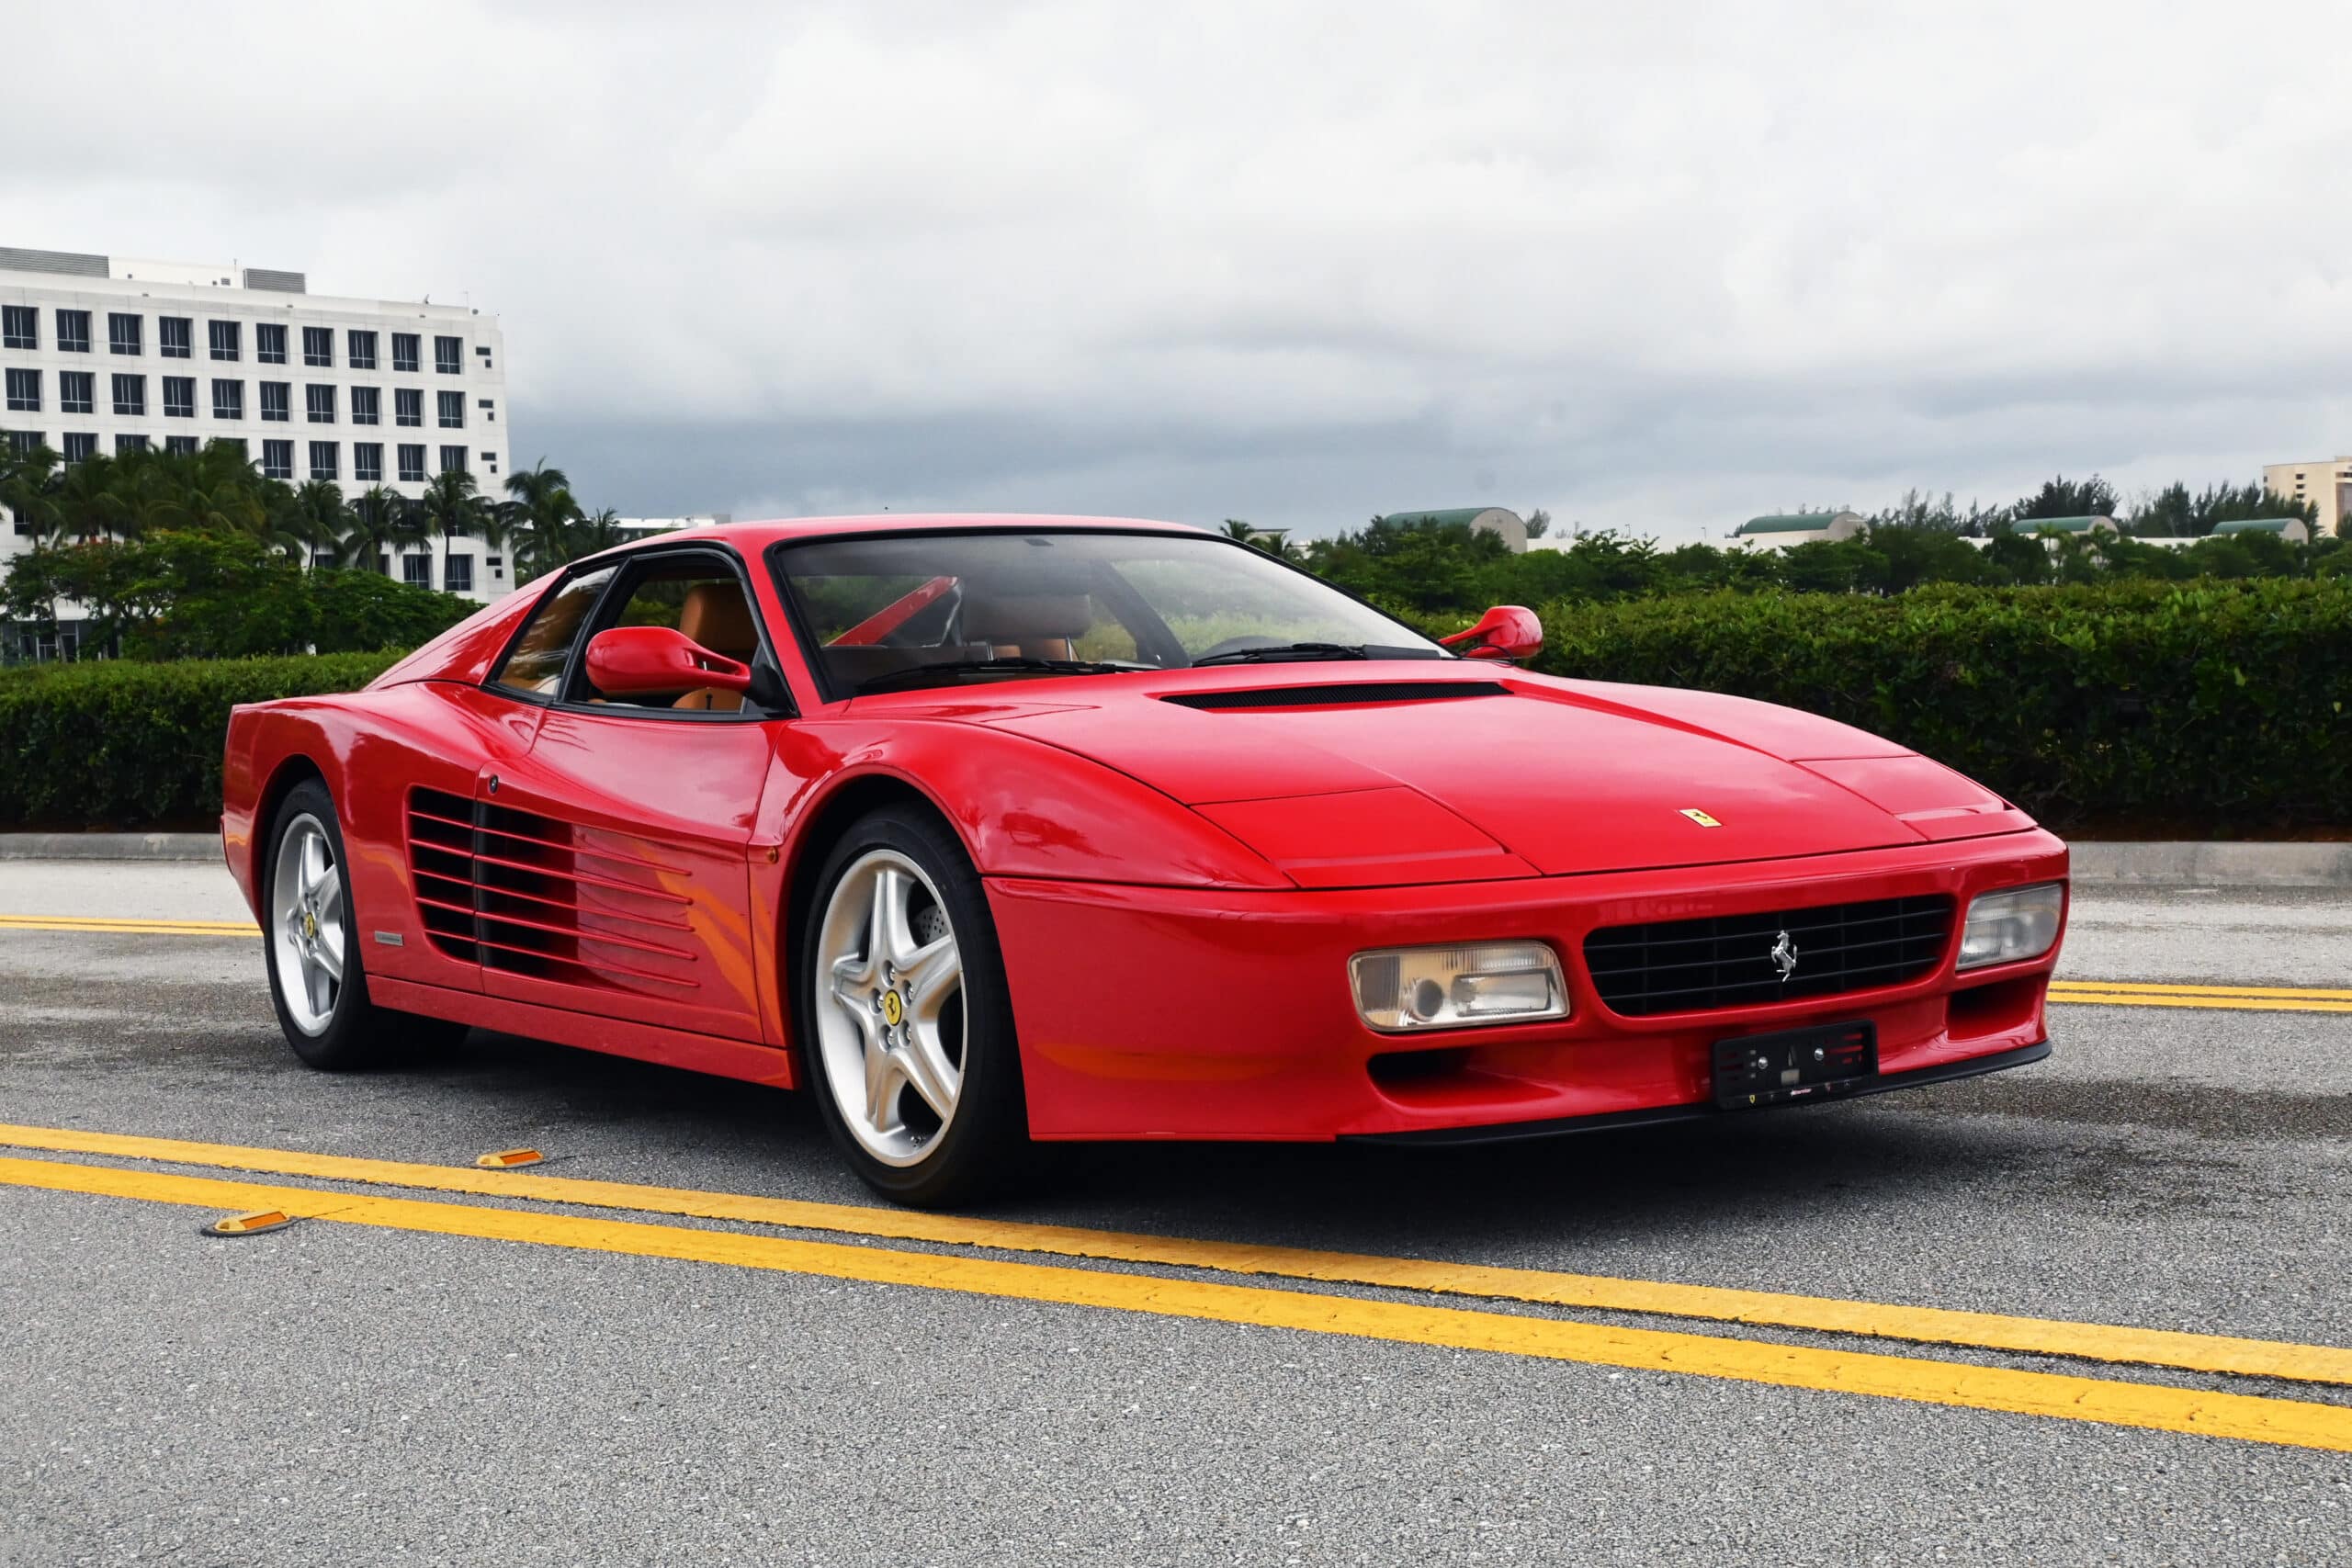 1994 Ferrari 512TR ABS, reported to be Ferrari Suisse promotional car, and one of 78 units ABS TRs made, belt service just done, all original, service history since new, Swiss Ferrari Collector owned